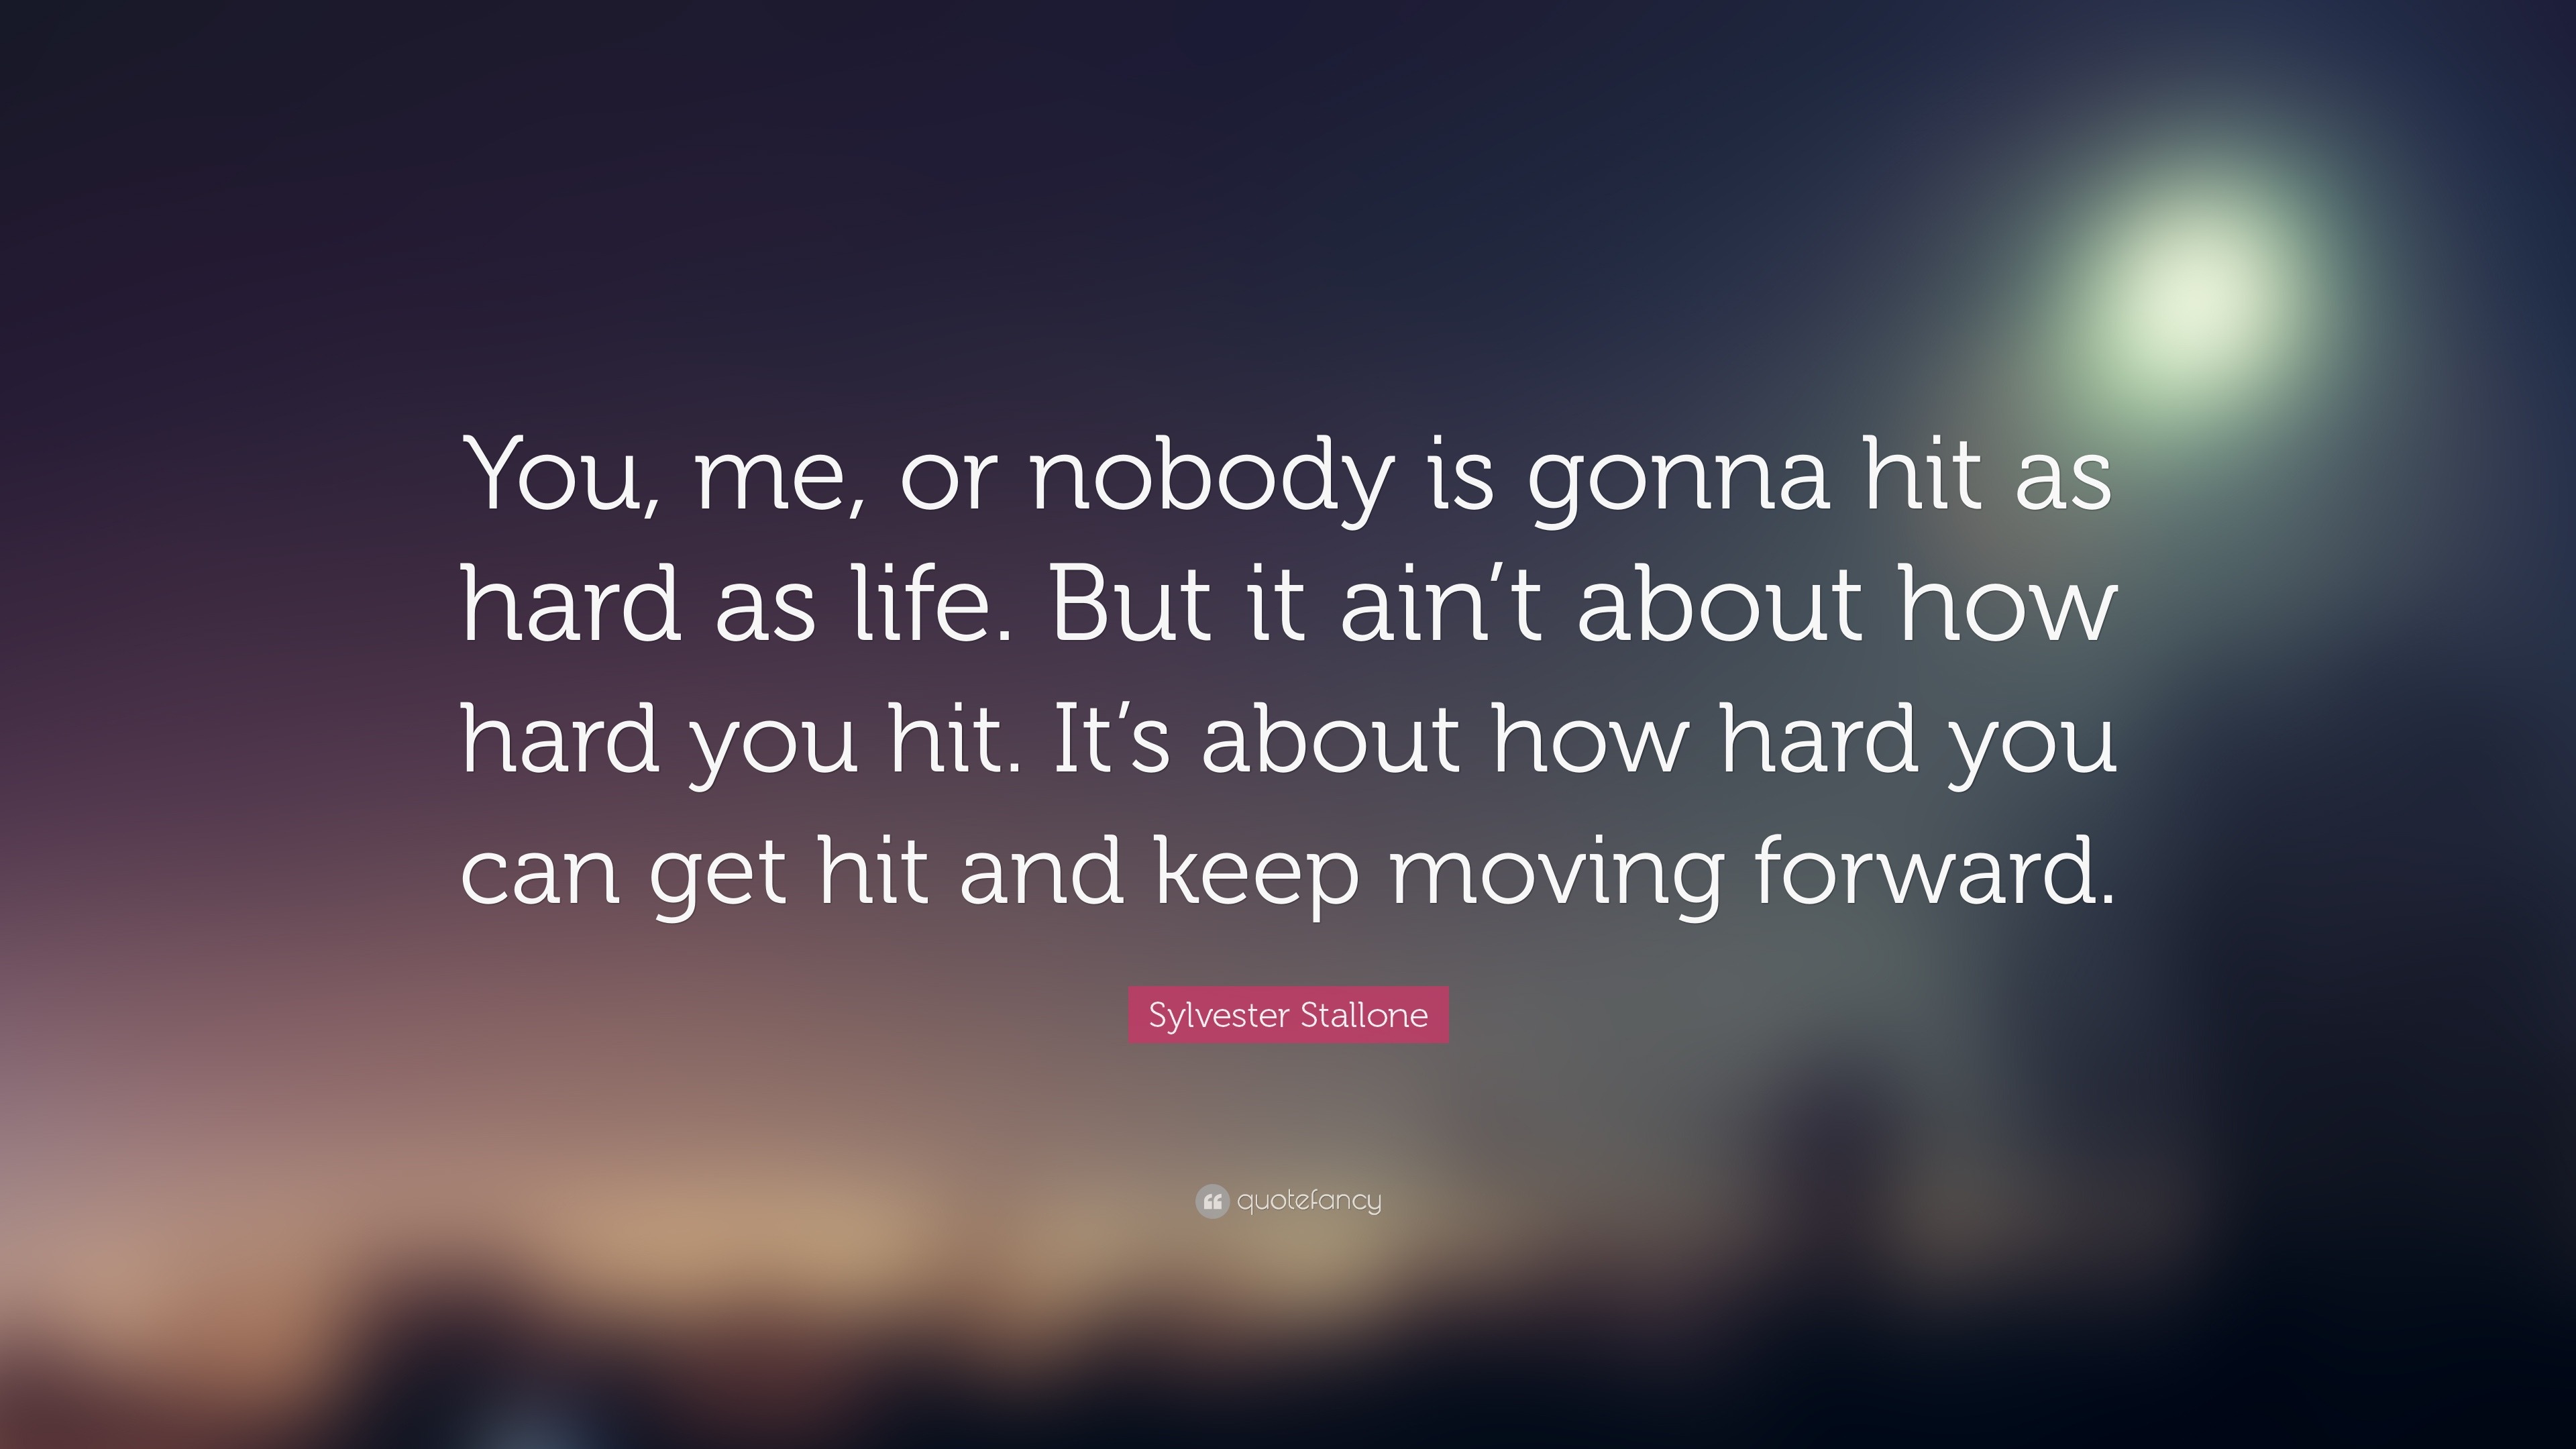 Sylvester Stallone Quote: “You, me, or nobody is gonna hit as hard as